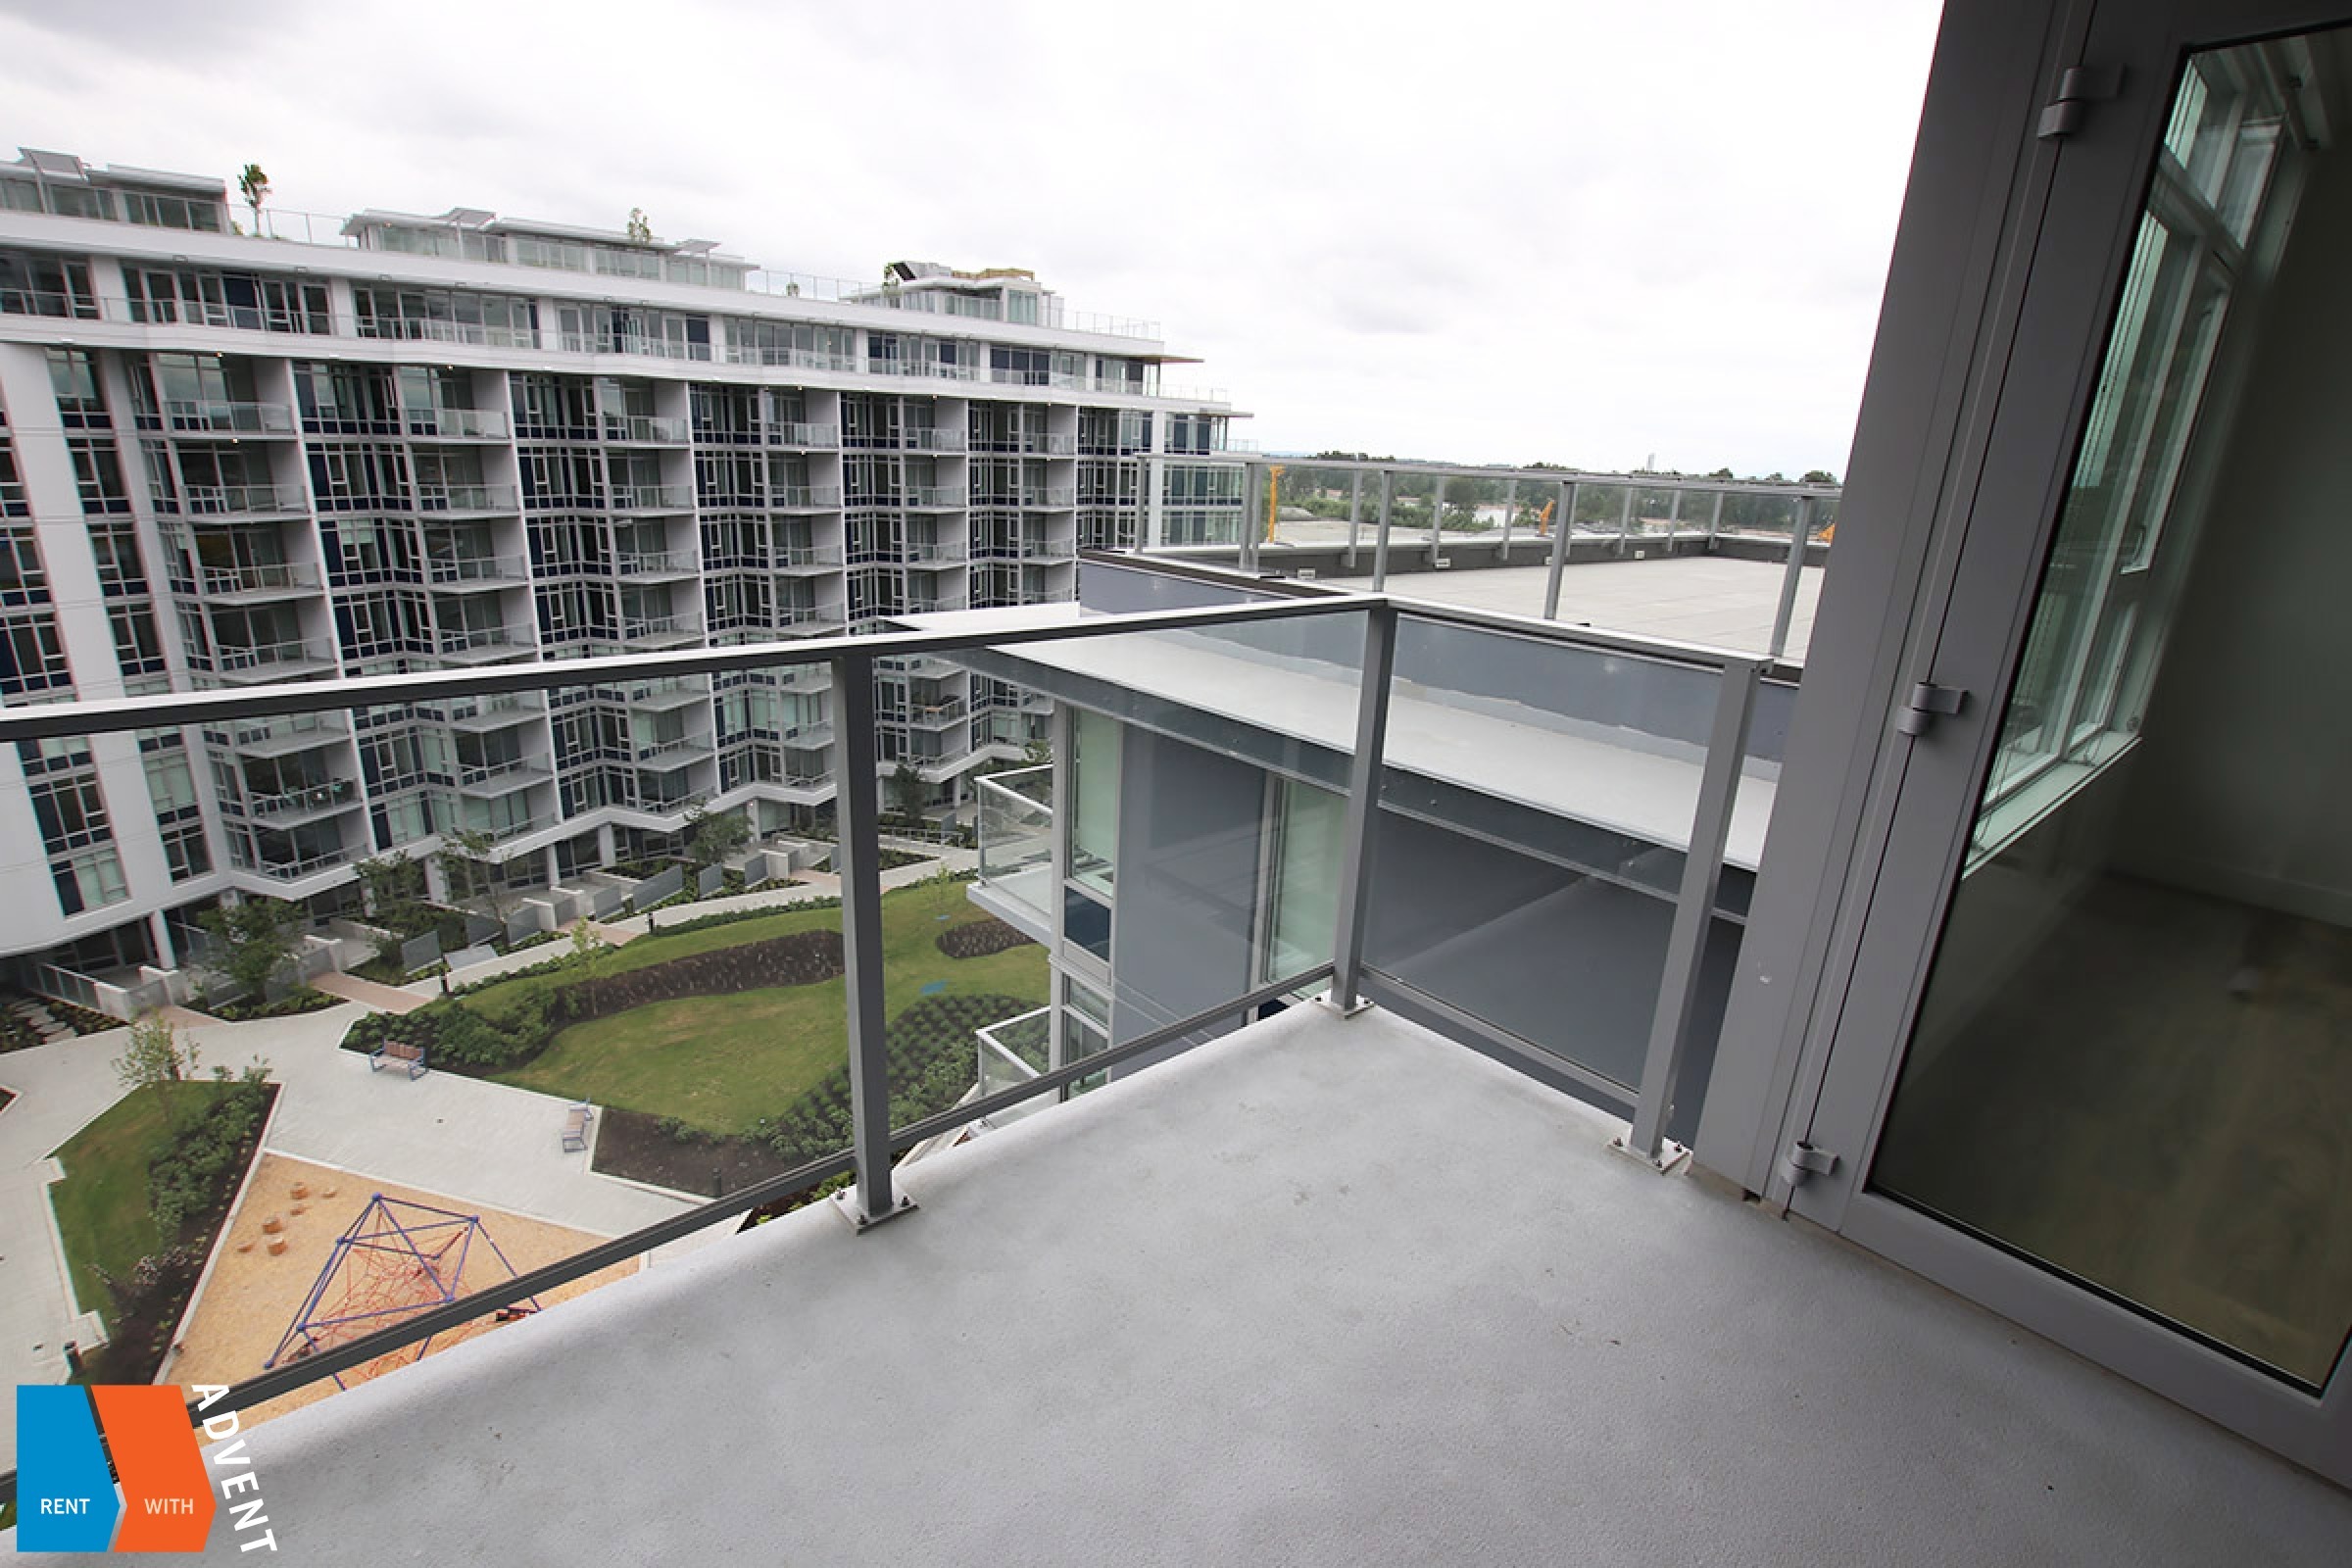 Brand New 10th Floor Unfurnished 1 Bedroom Apartment Rental at 1 Town Centre in East Vancouver. 1003 - 8538 River District Crossing, Vancouver, BC, Canada.